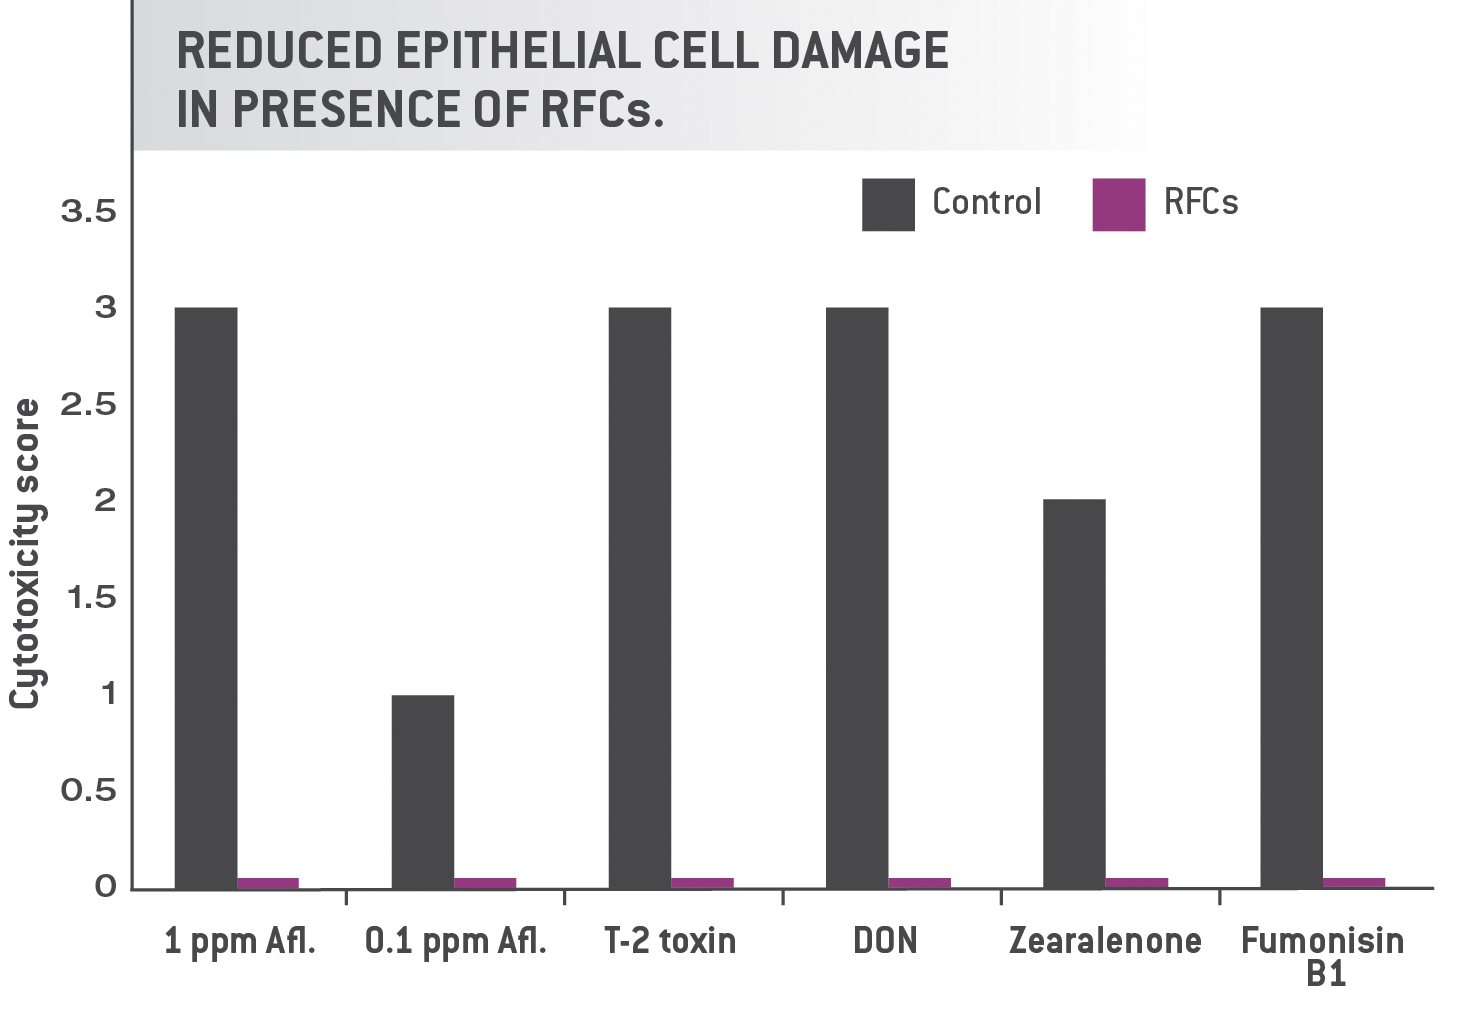 Chart of Reduced Epithelial Cell Damage in Presence RFCs